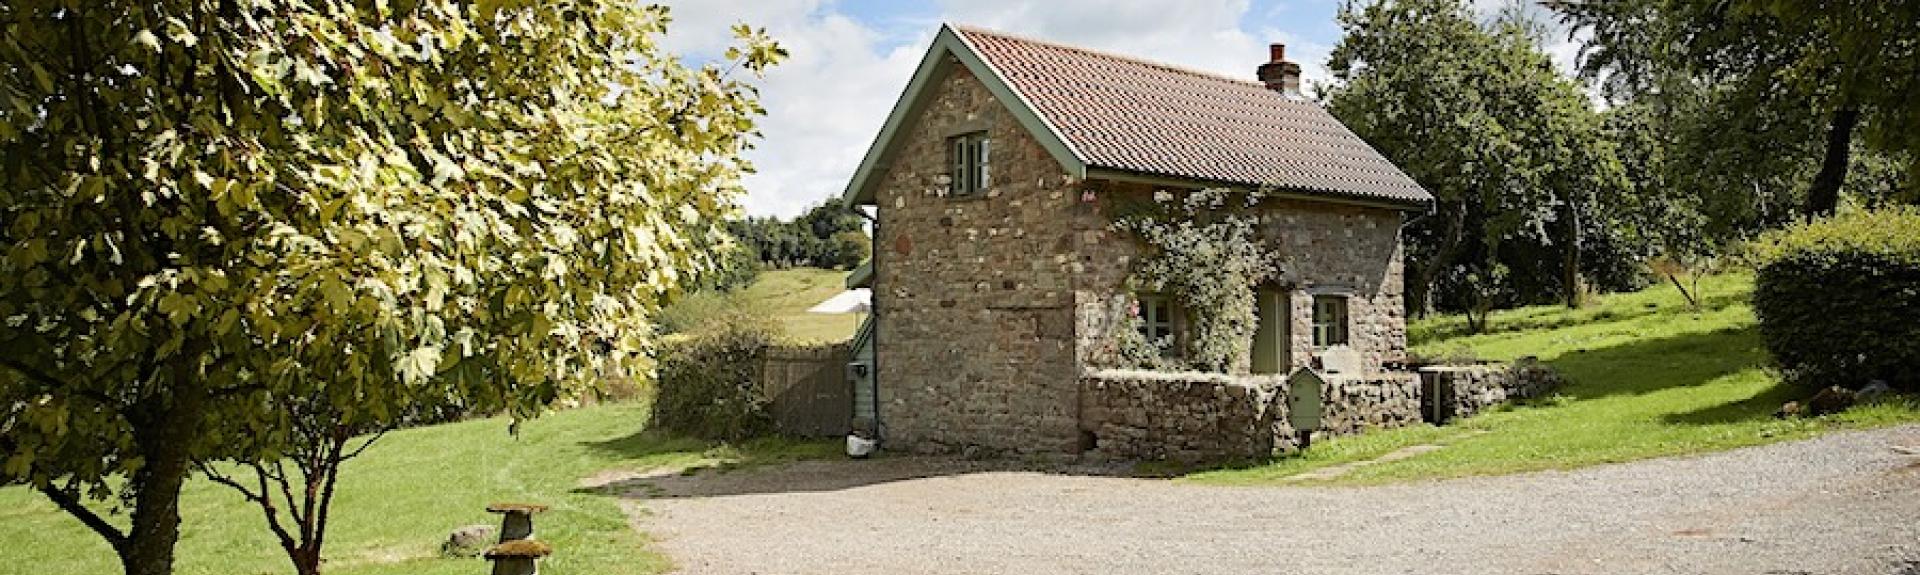 A stone drive leads to a barn conversion surrounded by well-mown lawns.